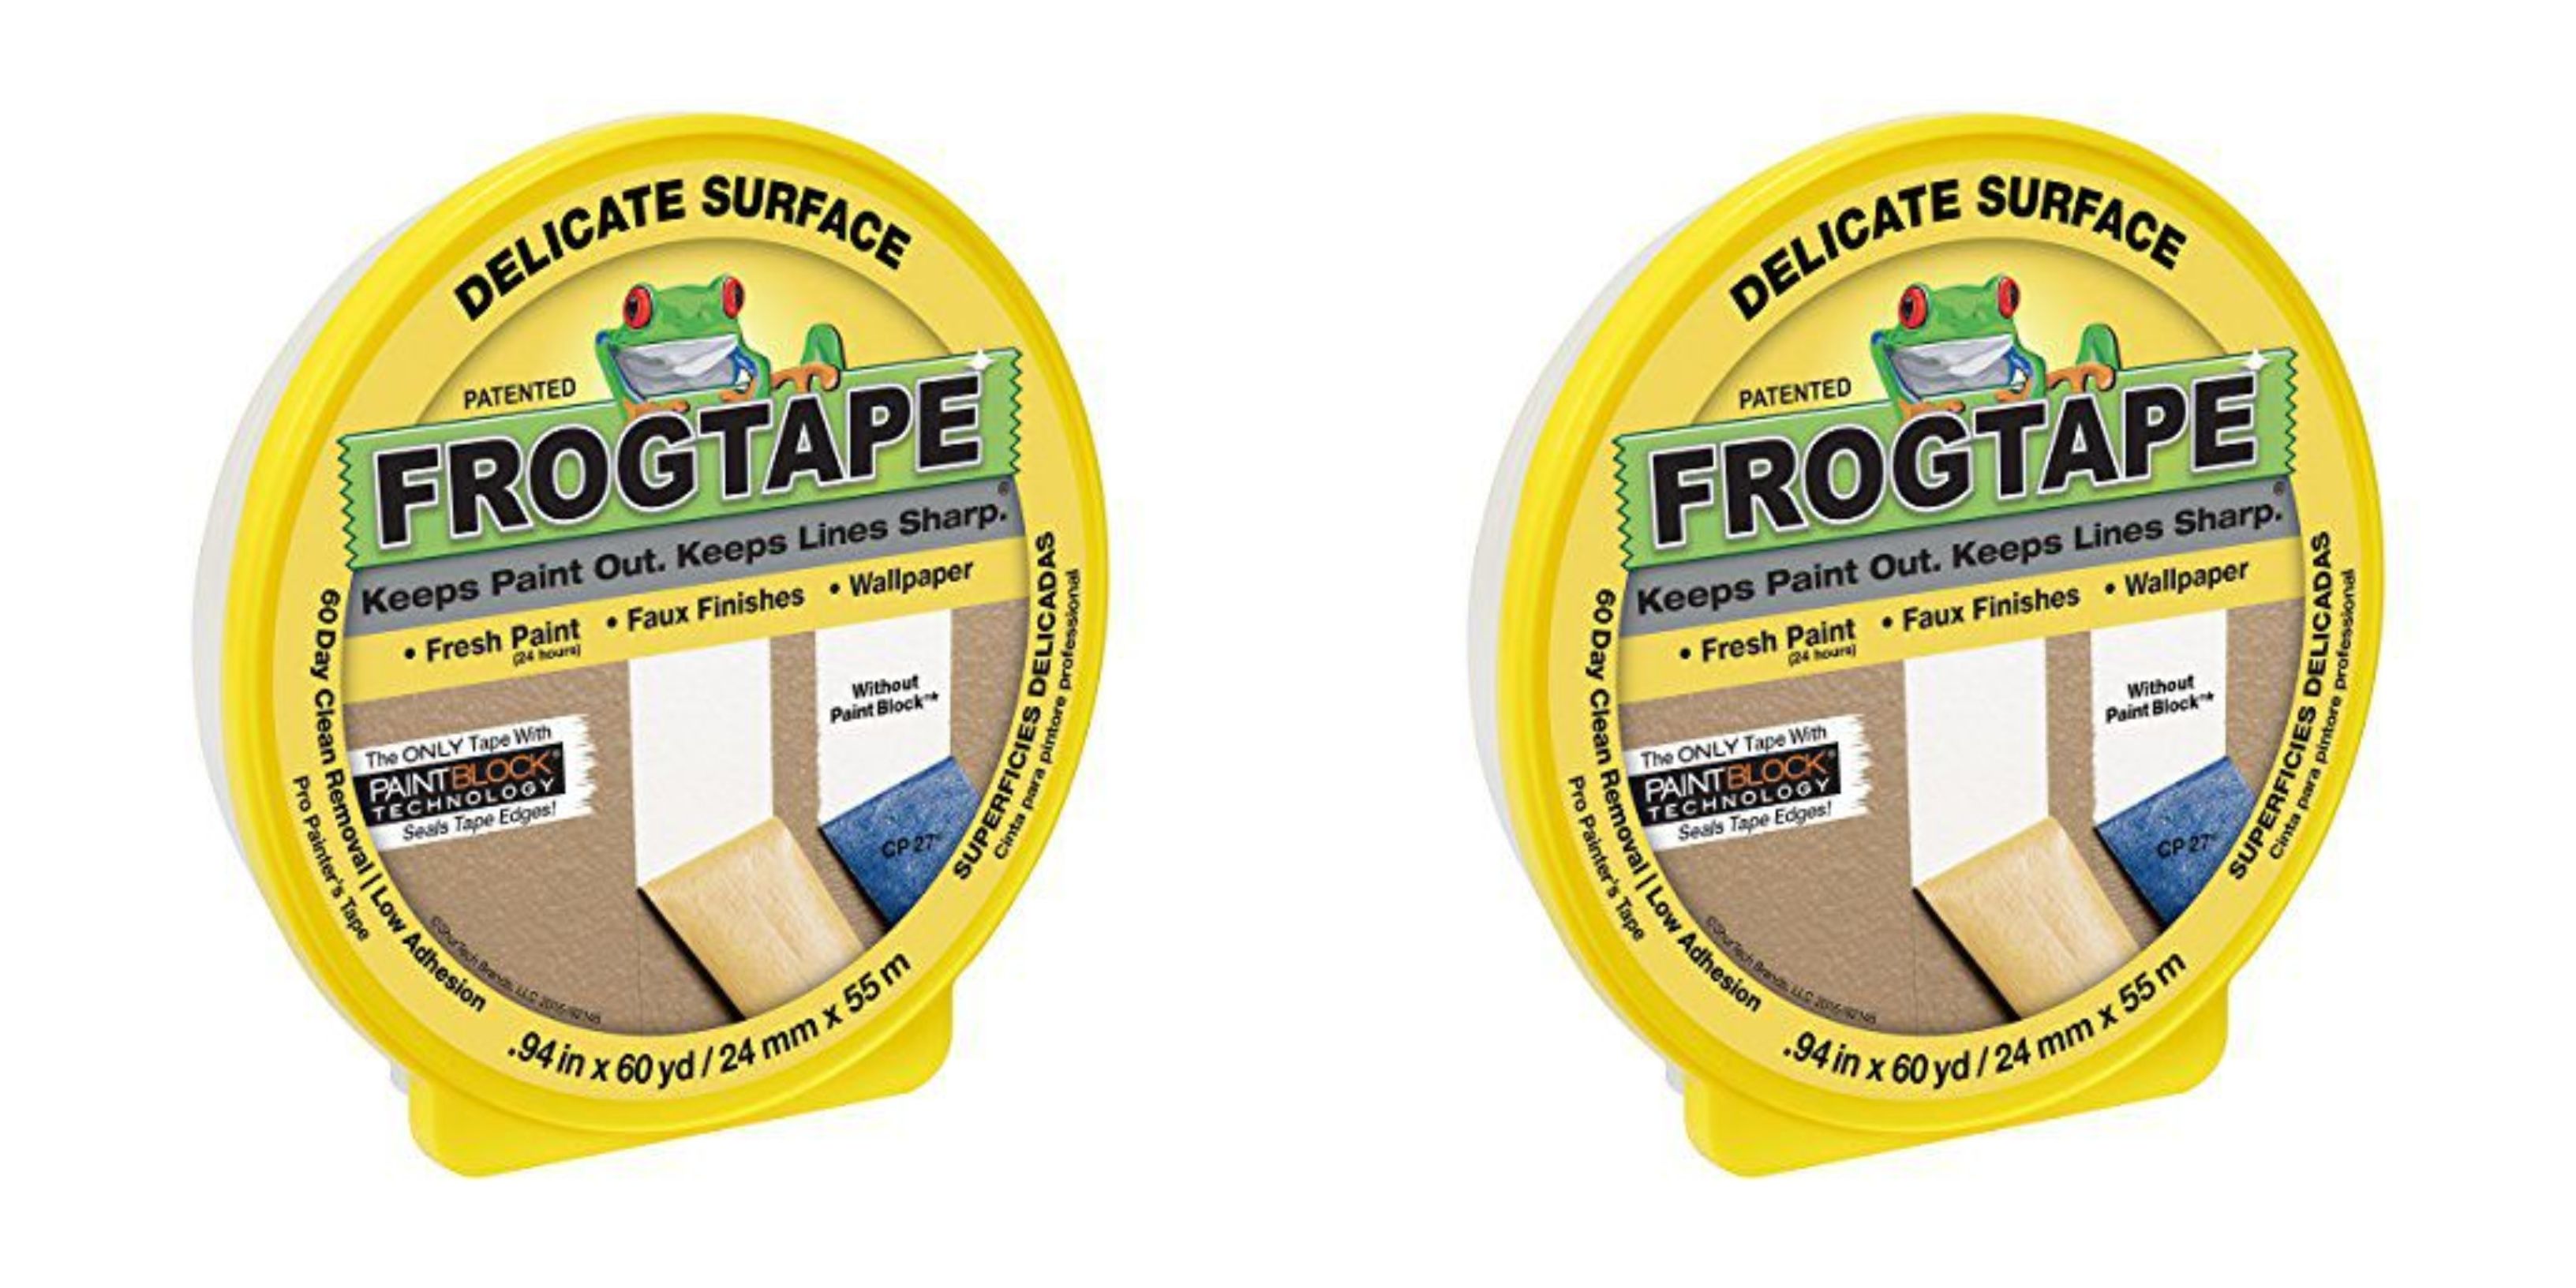 Frog Tape Delicate Surface Painter's Tape Review